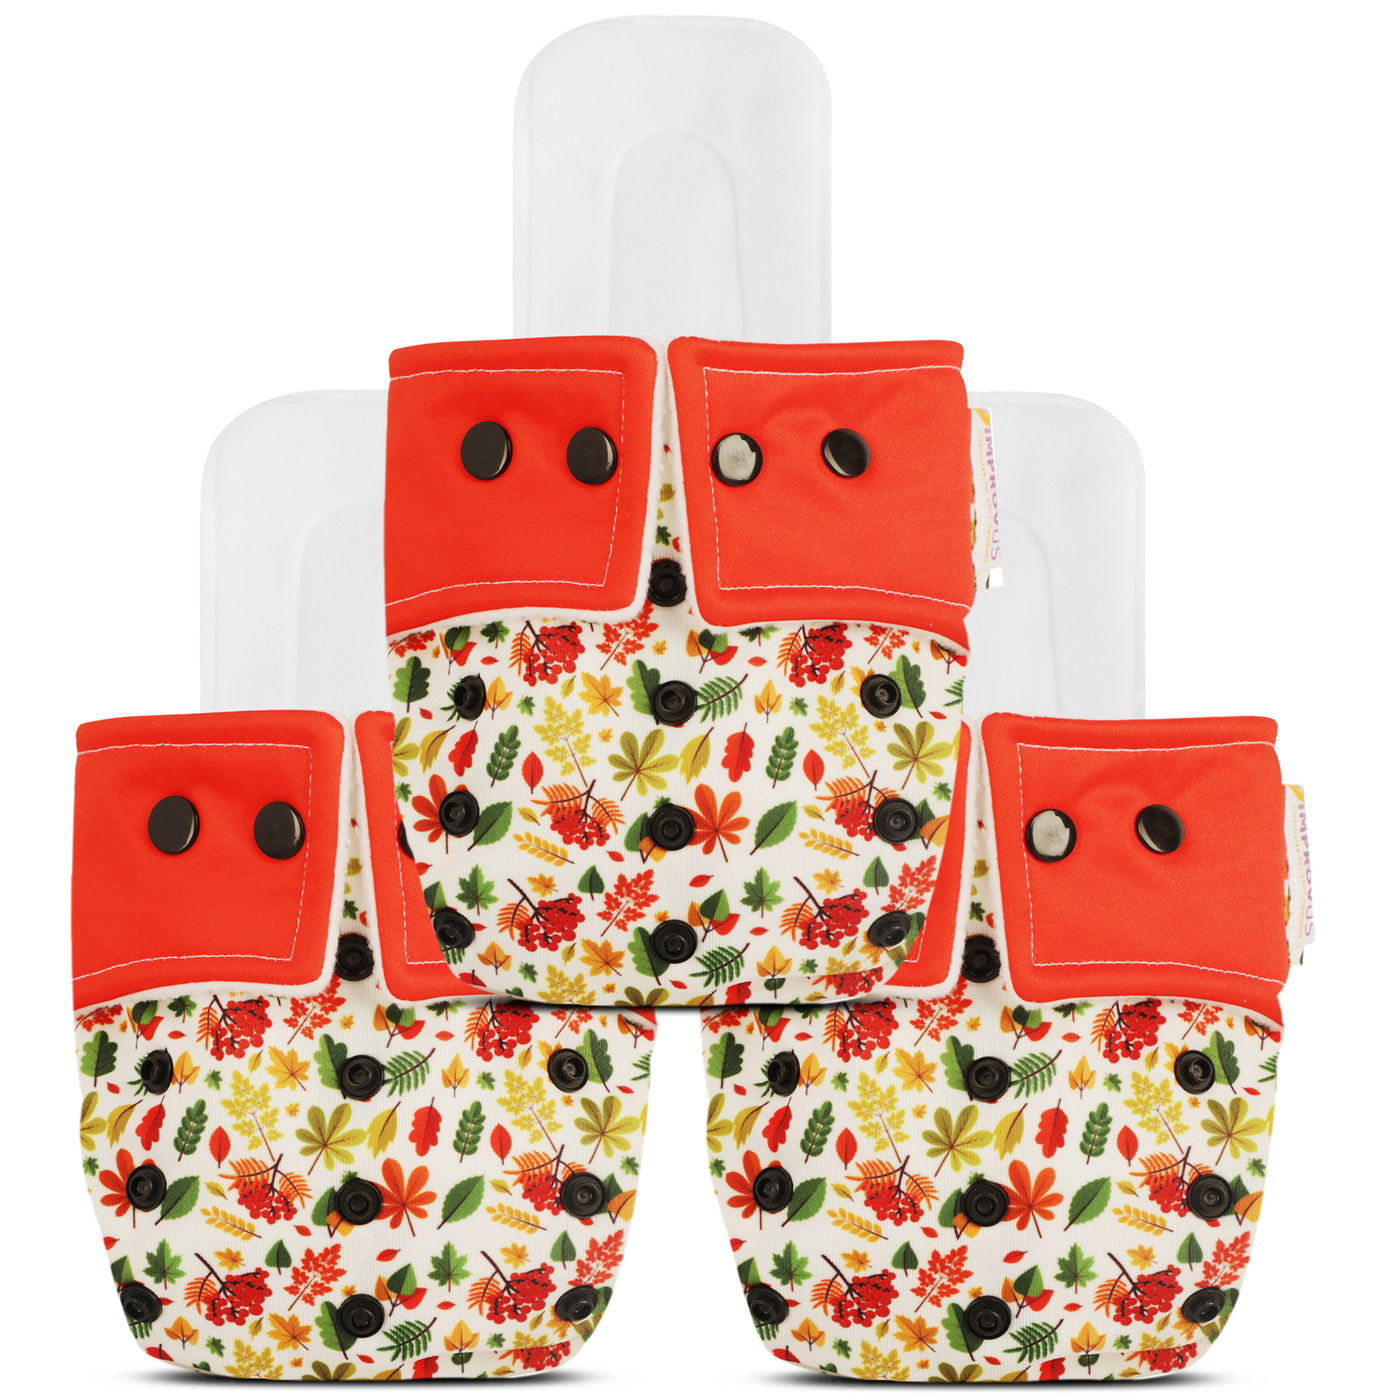 reusable diapers for 2 year old